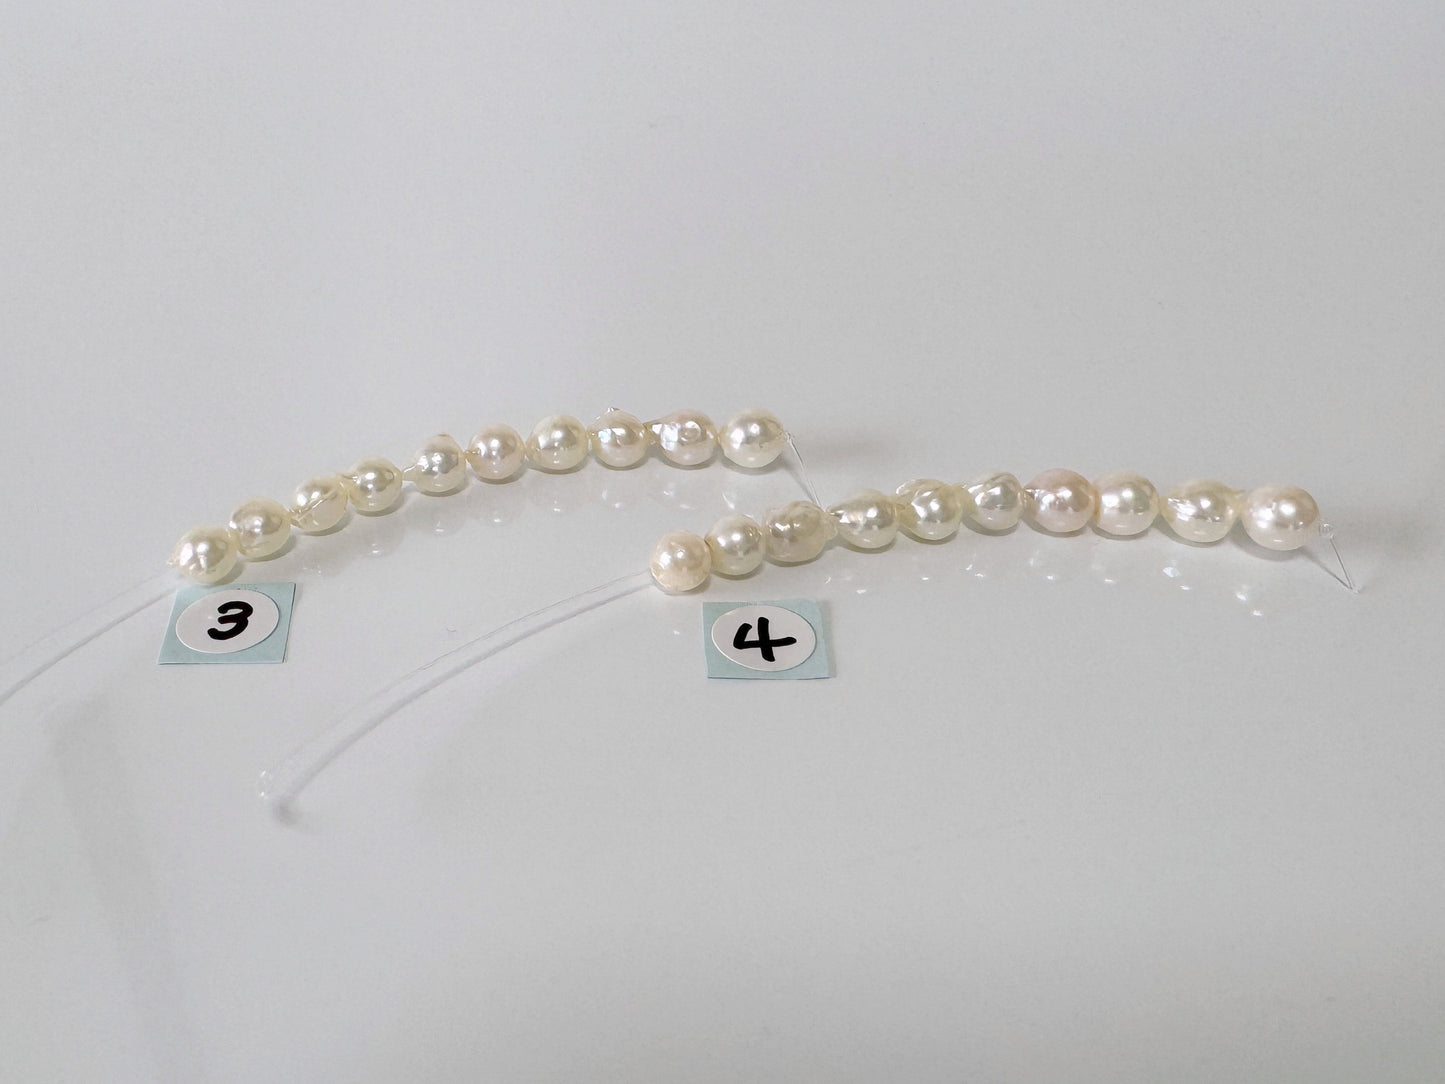 10 Pieces Short Strand of Japanese White Akoya Pearl Beads, 5-5.6mm Semi-baroque, Genuine Akoya Pearl, Cultured in Sea Water